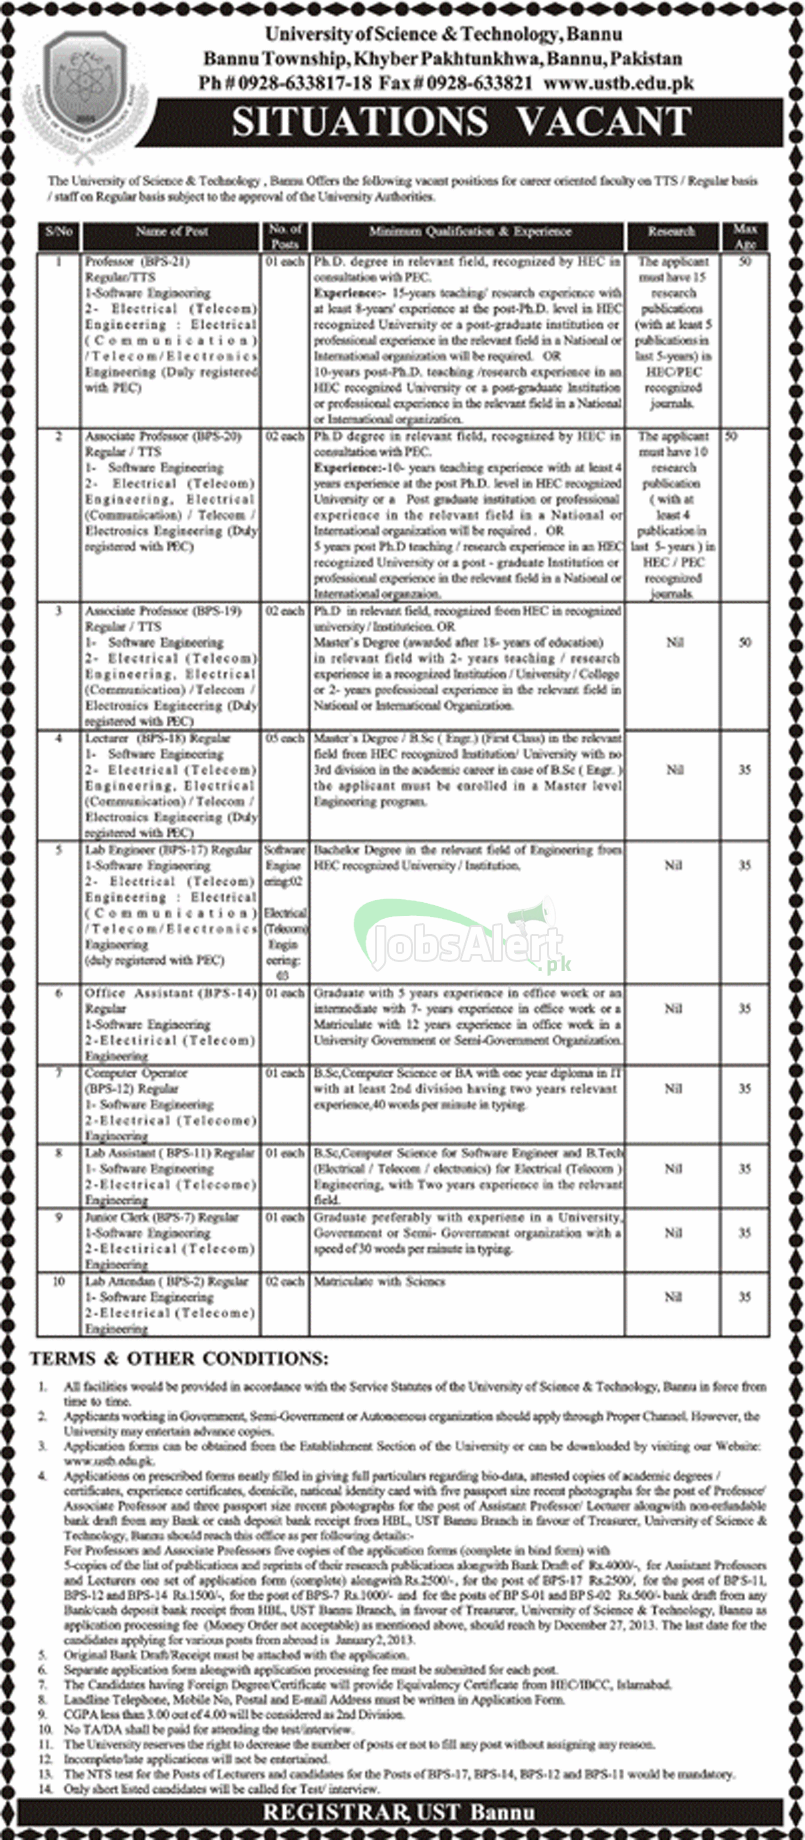 Professor & Lecturer Jobs in University of Science & Technology Bannu